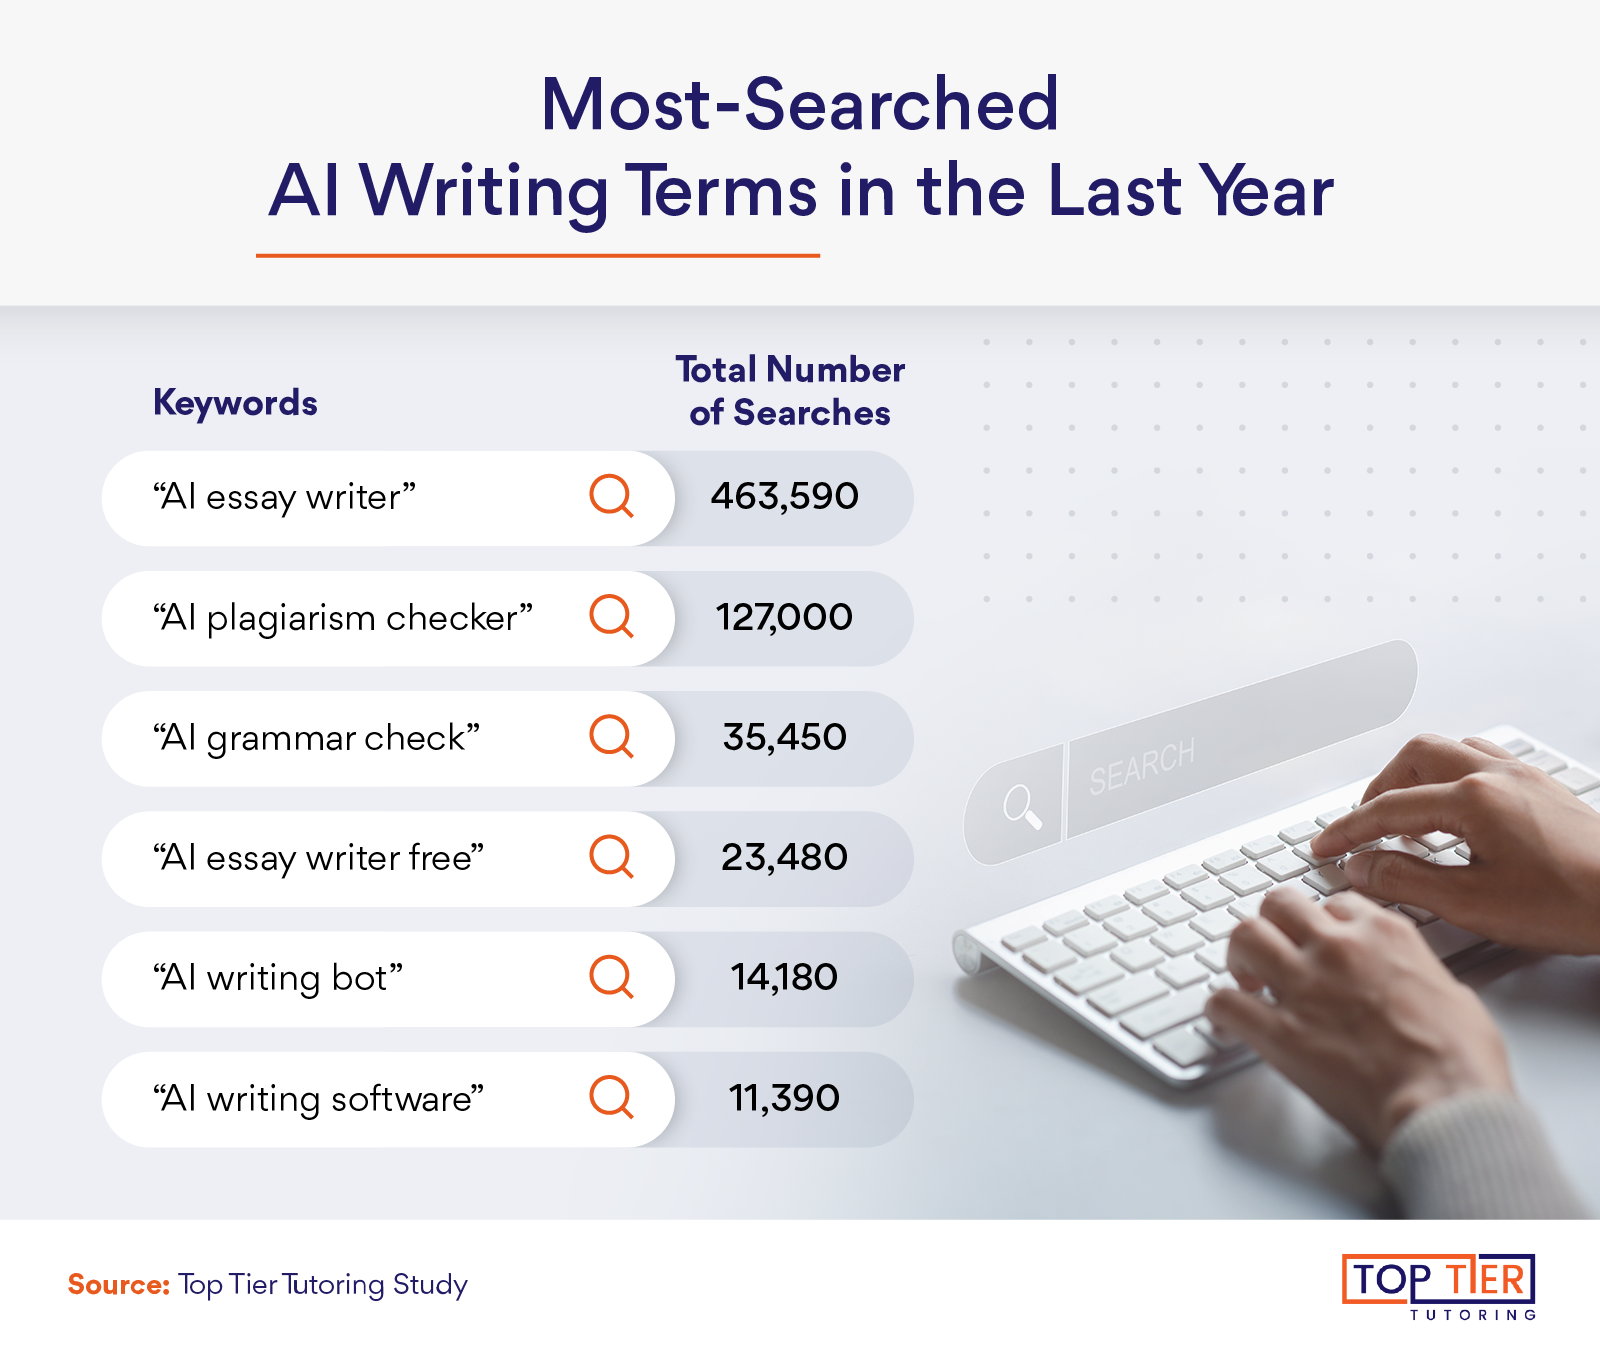 This image explores total search volume for AI writing terms over the last year. 